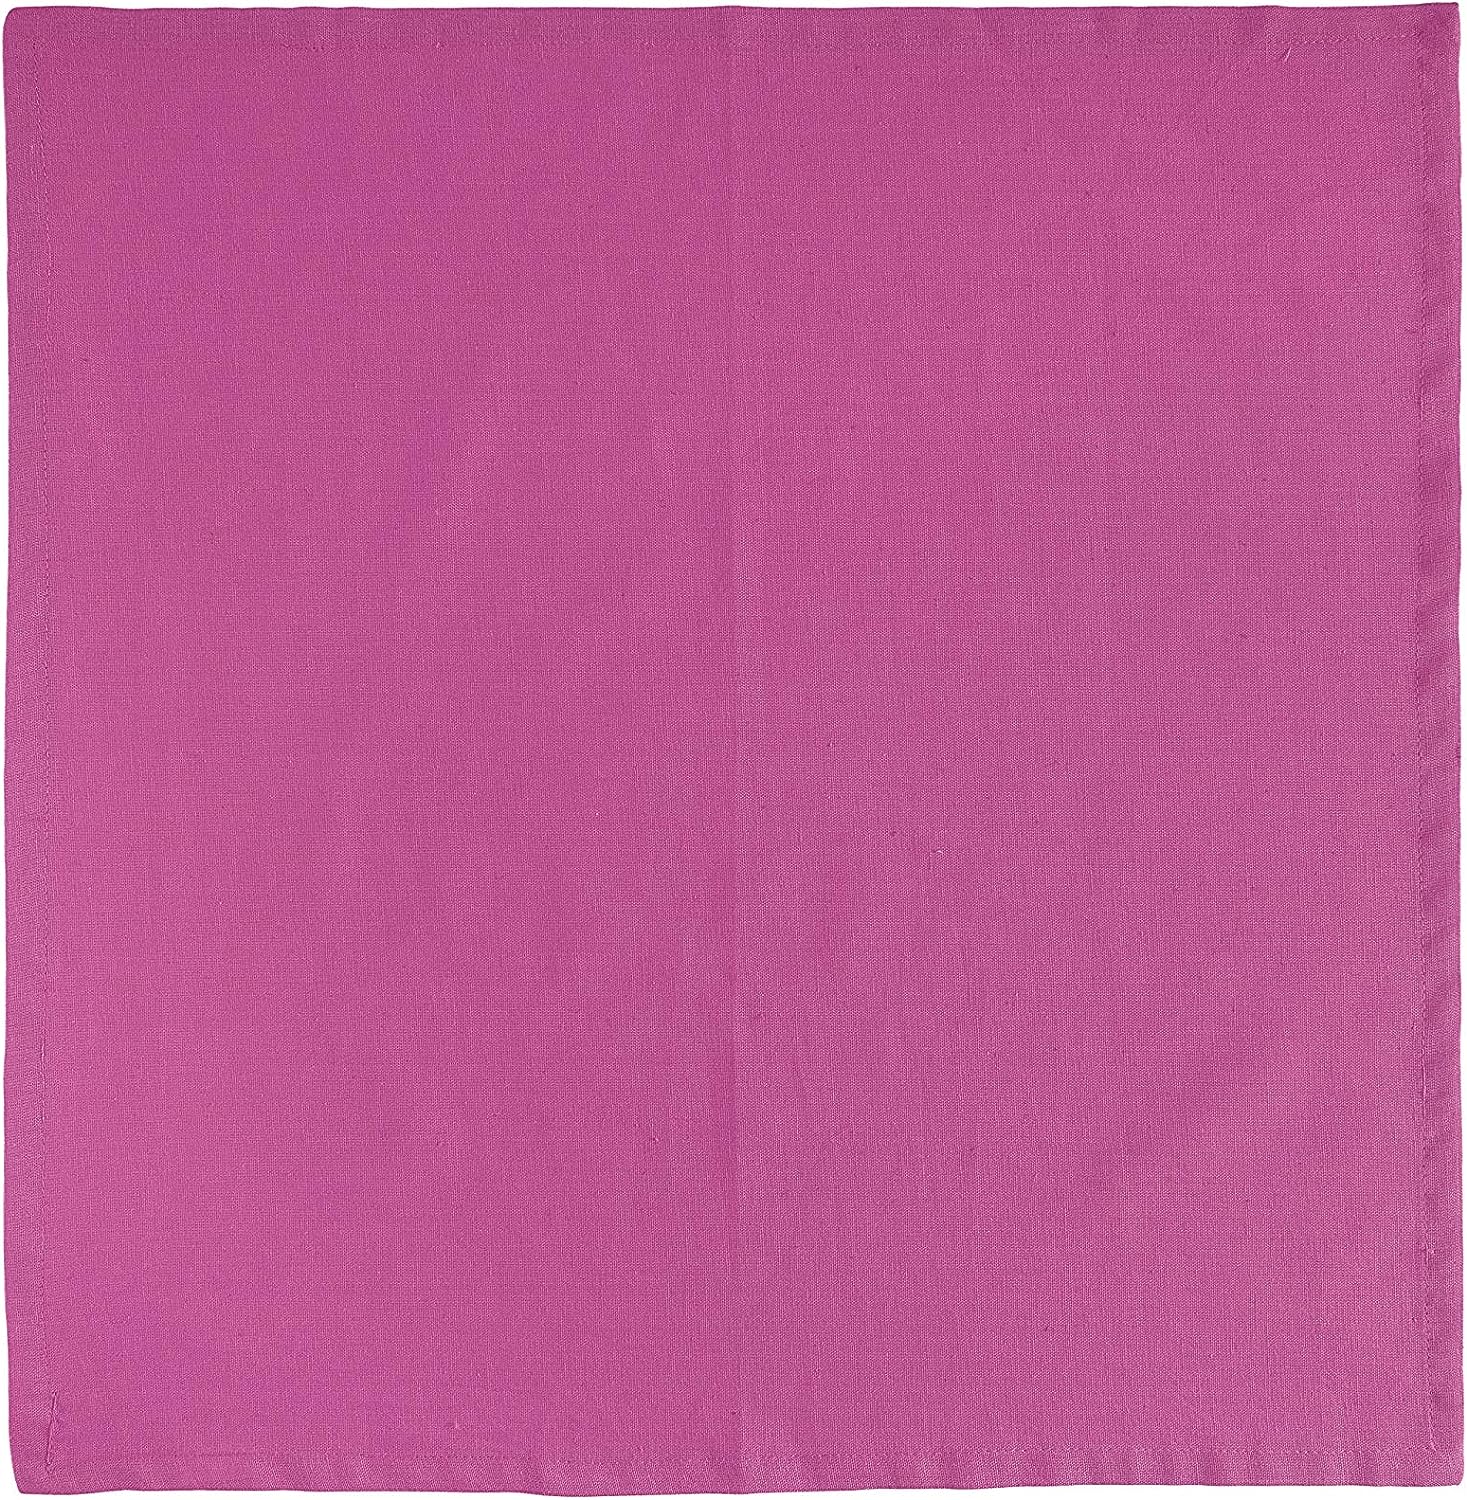 FINGERCRAFT Dinner Cloth Napkins, Cotton Linen Blend Fabric 12 Pack Easter Special, Premium Quality, Mitered Corners for Every Day Use Napkins are Pre Shrunk and Good Absorbency Magenta 7